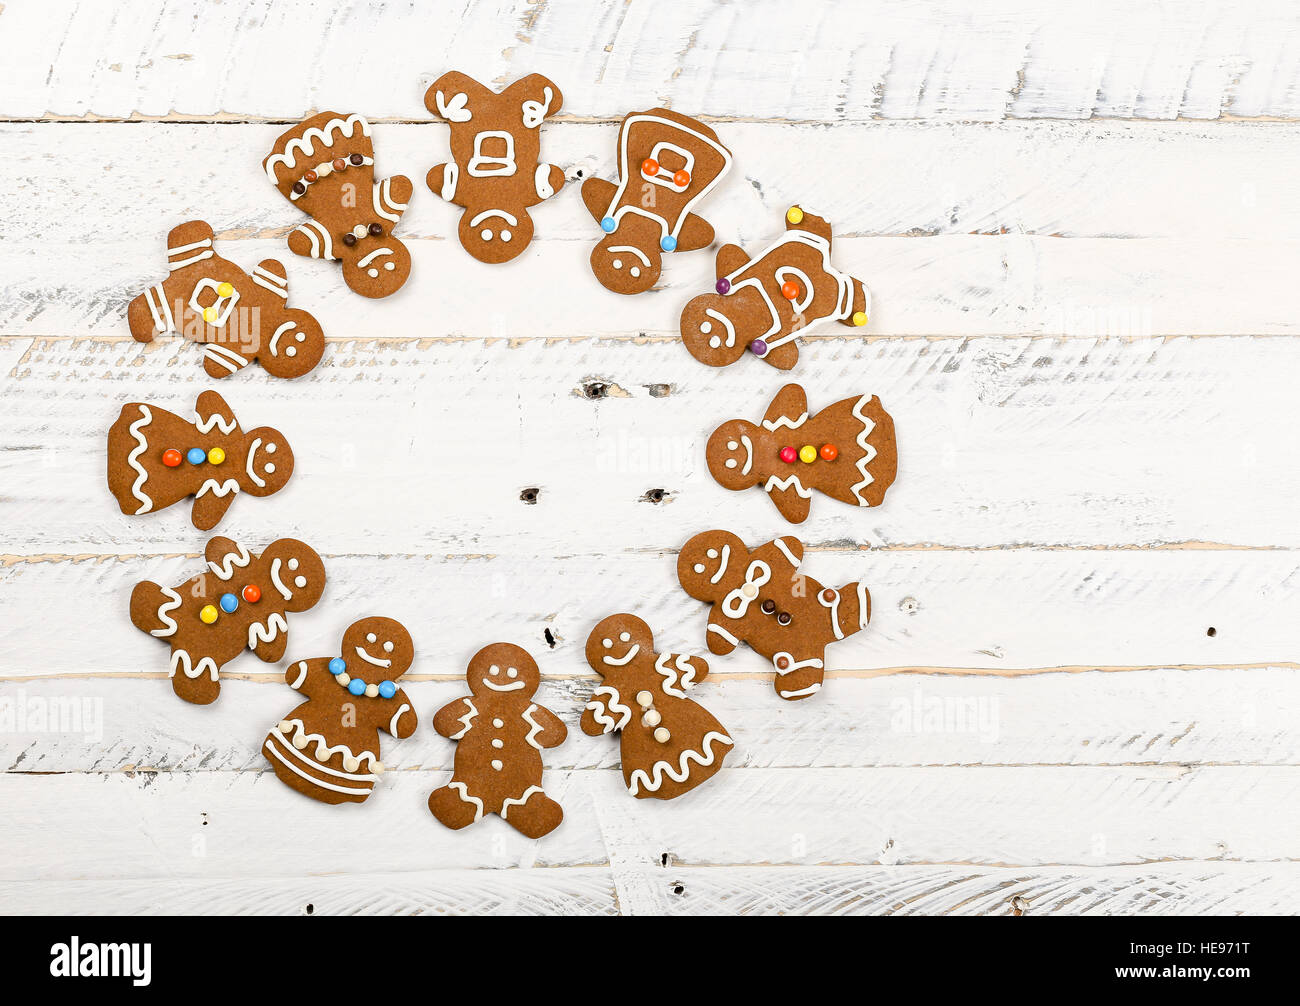 Christmas homemade gingerbread man family cookies couples on white wooden table background, International friendship concept Stock Photo